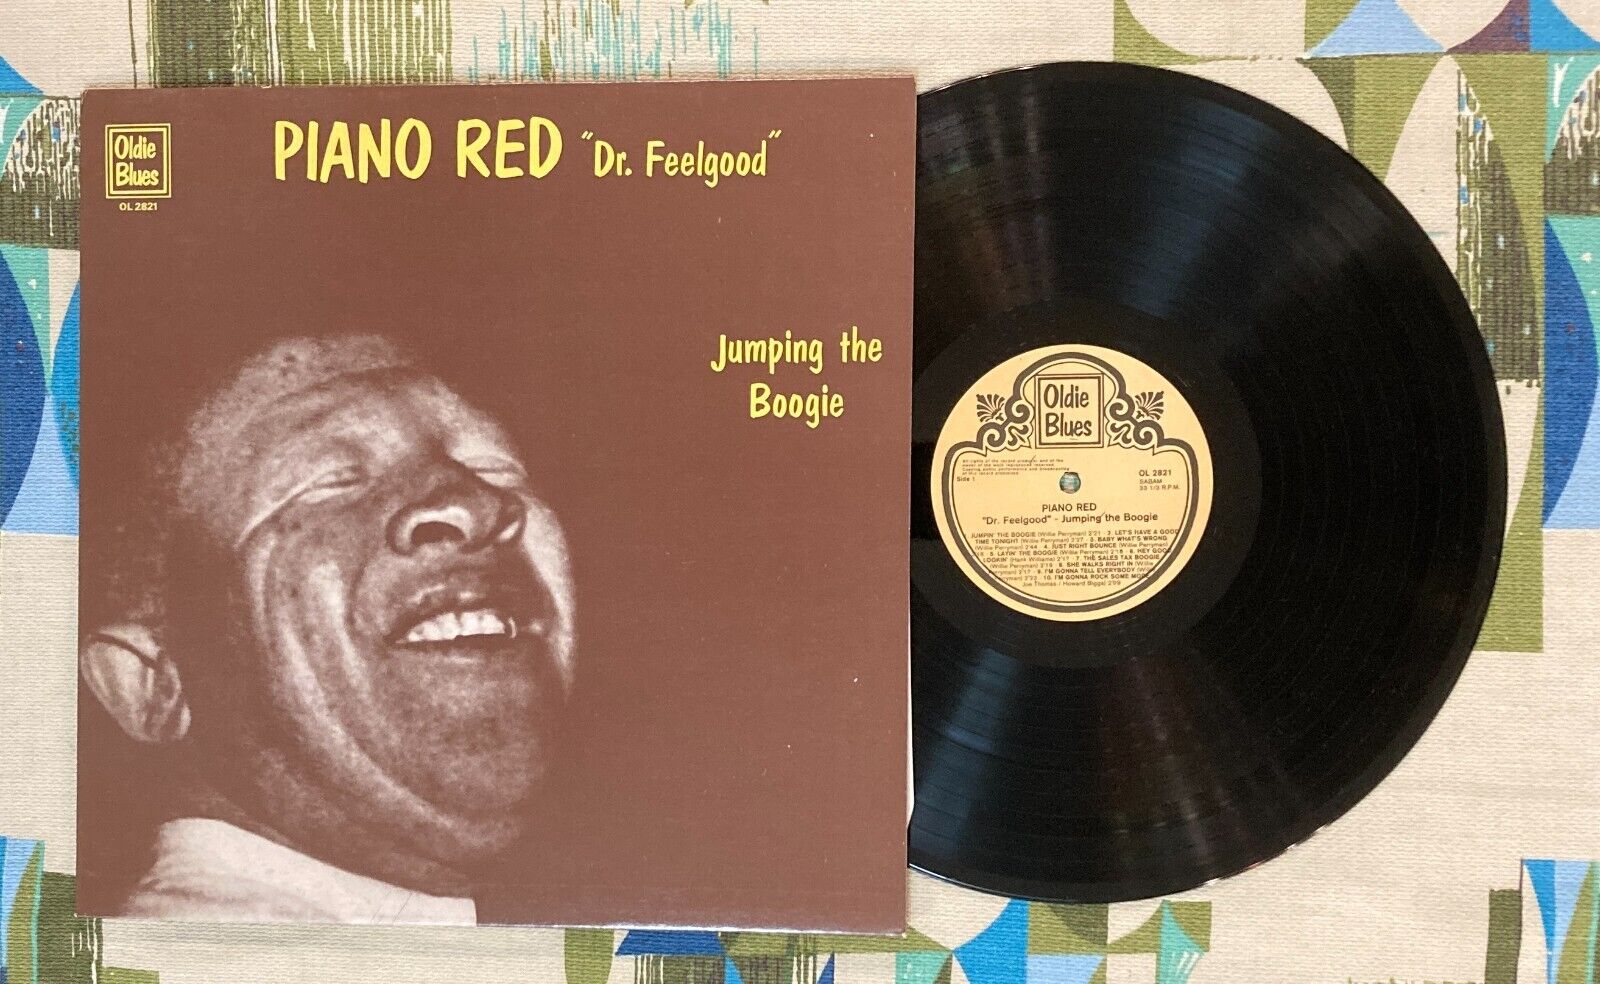 Piano Red aka Dr. Feelgood Jumping Boogie | eBay